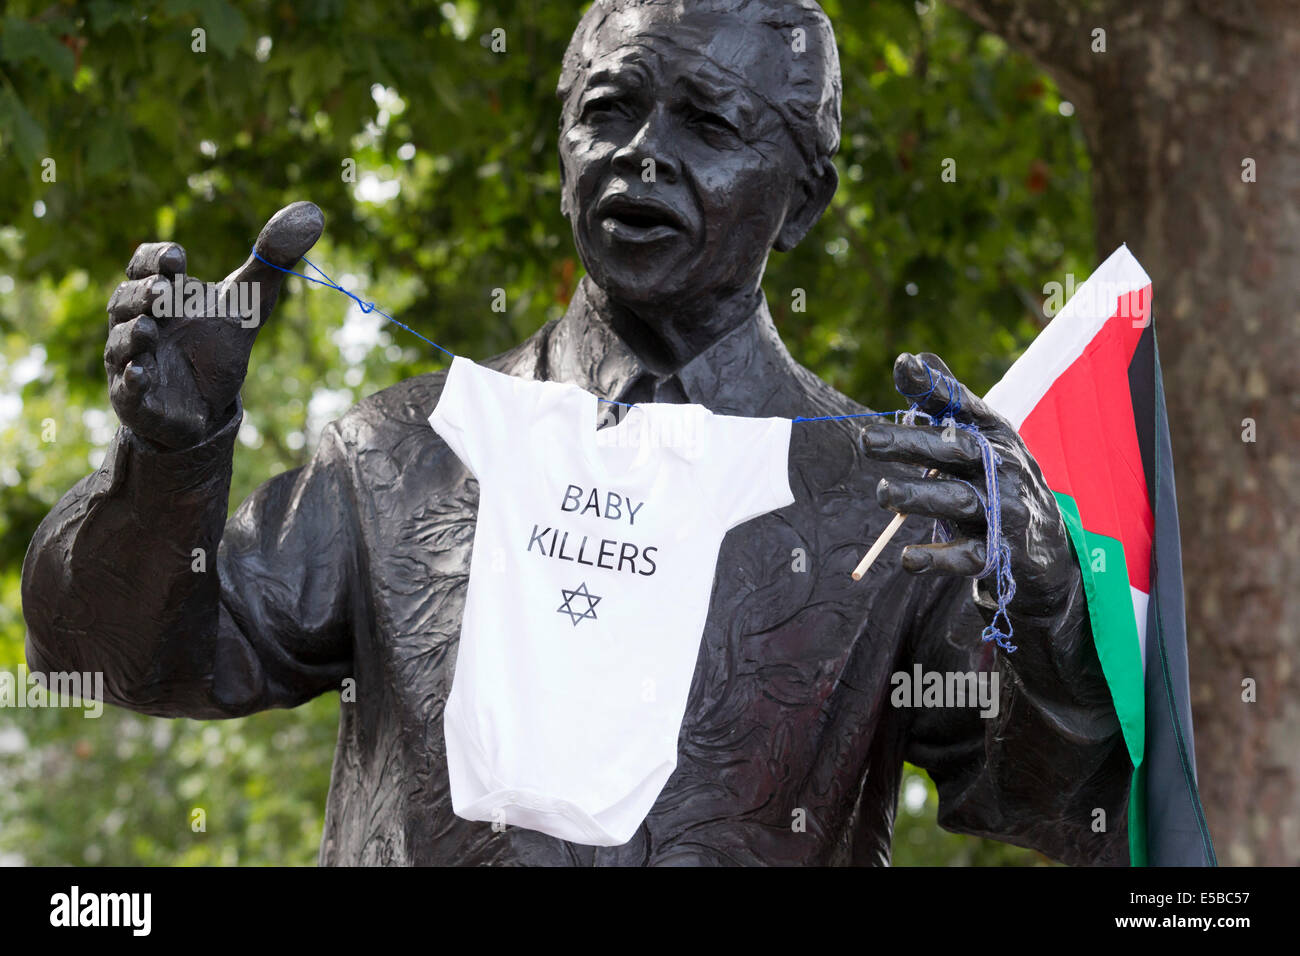 London, UK. 26 July 2014. Protesters have attached a Palestinian flag and a baby romper with the wording 'Baby Killers' and the Star of David to the Nelson Mandela statue in Parliament Square. Protesters gather in Parliament Square and Whitehall after a march from the Israeli Embassy in Kensington to call for an end to the Israeli military action against the Palestinians in the Gaza Strip at a political rallye. Credit:  Nick Savage/Alamy Live News Stock Photo